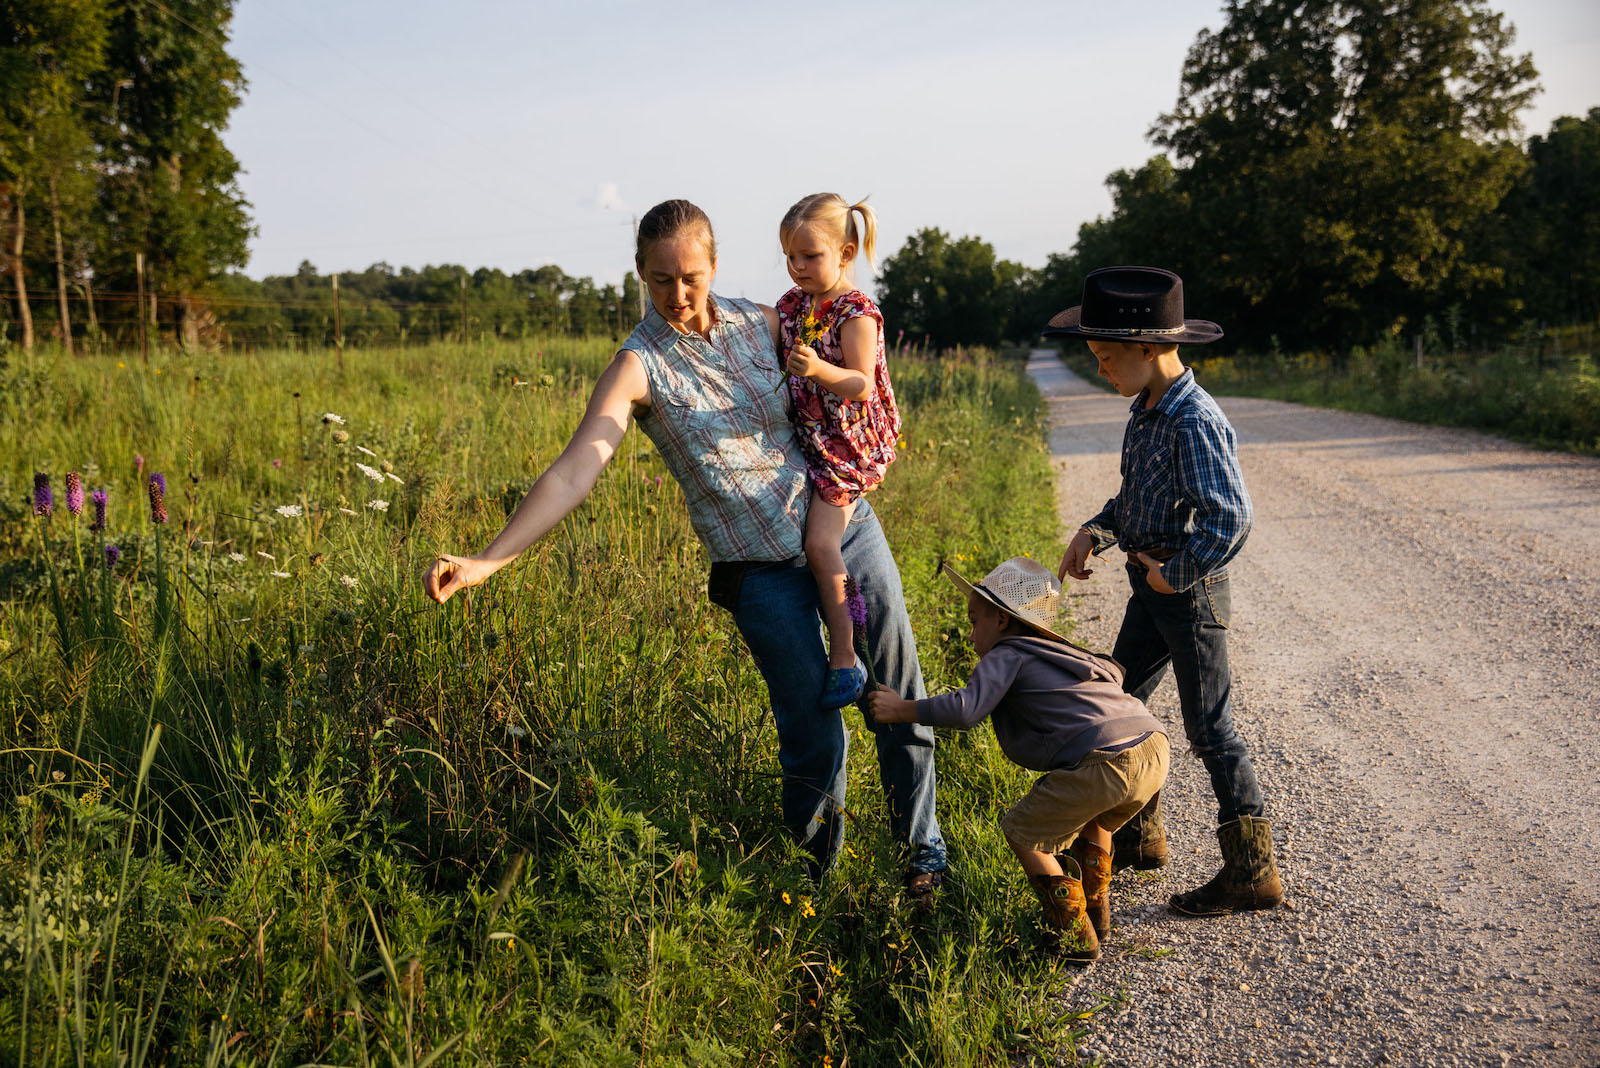 A woman holds a child near a field of tall grass and two children squat nearby